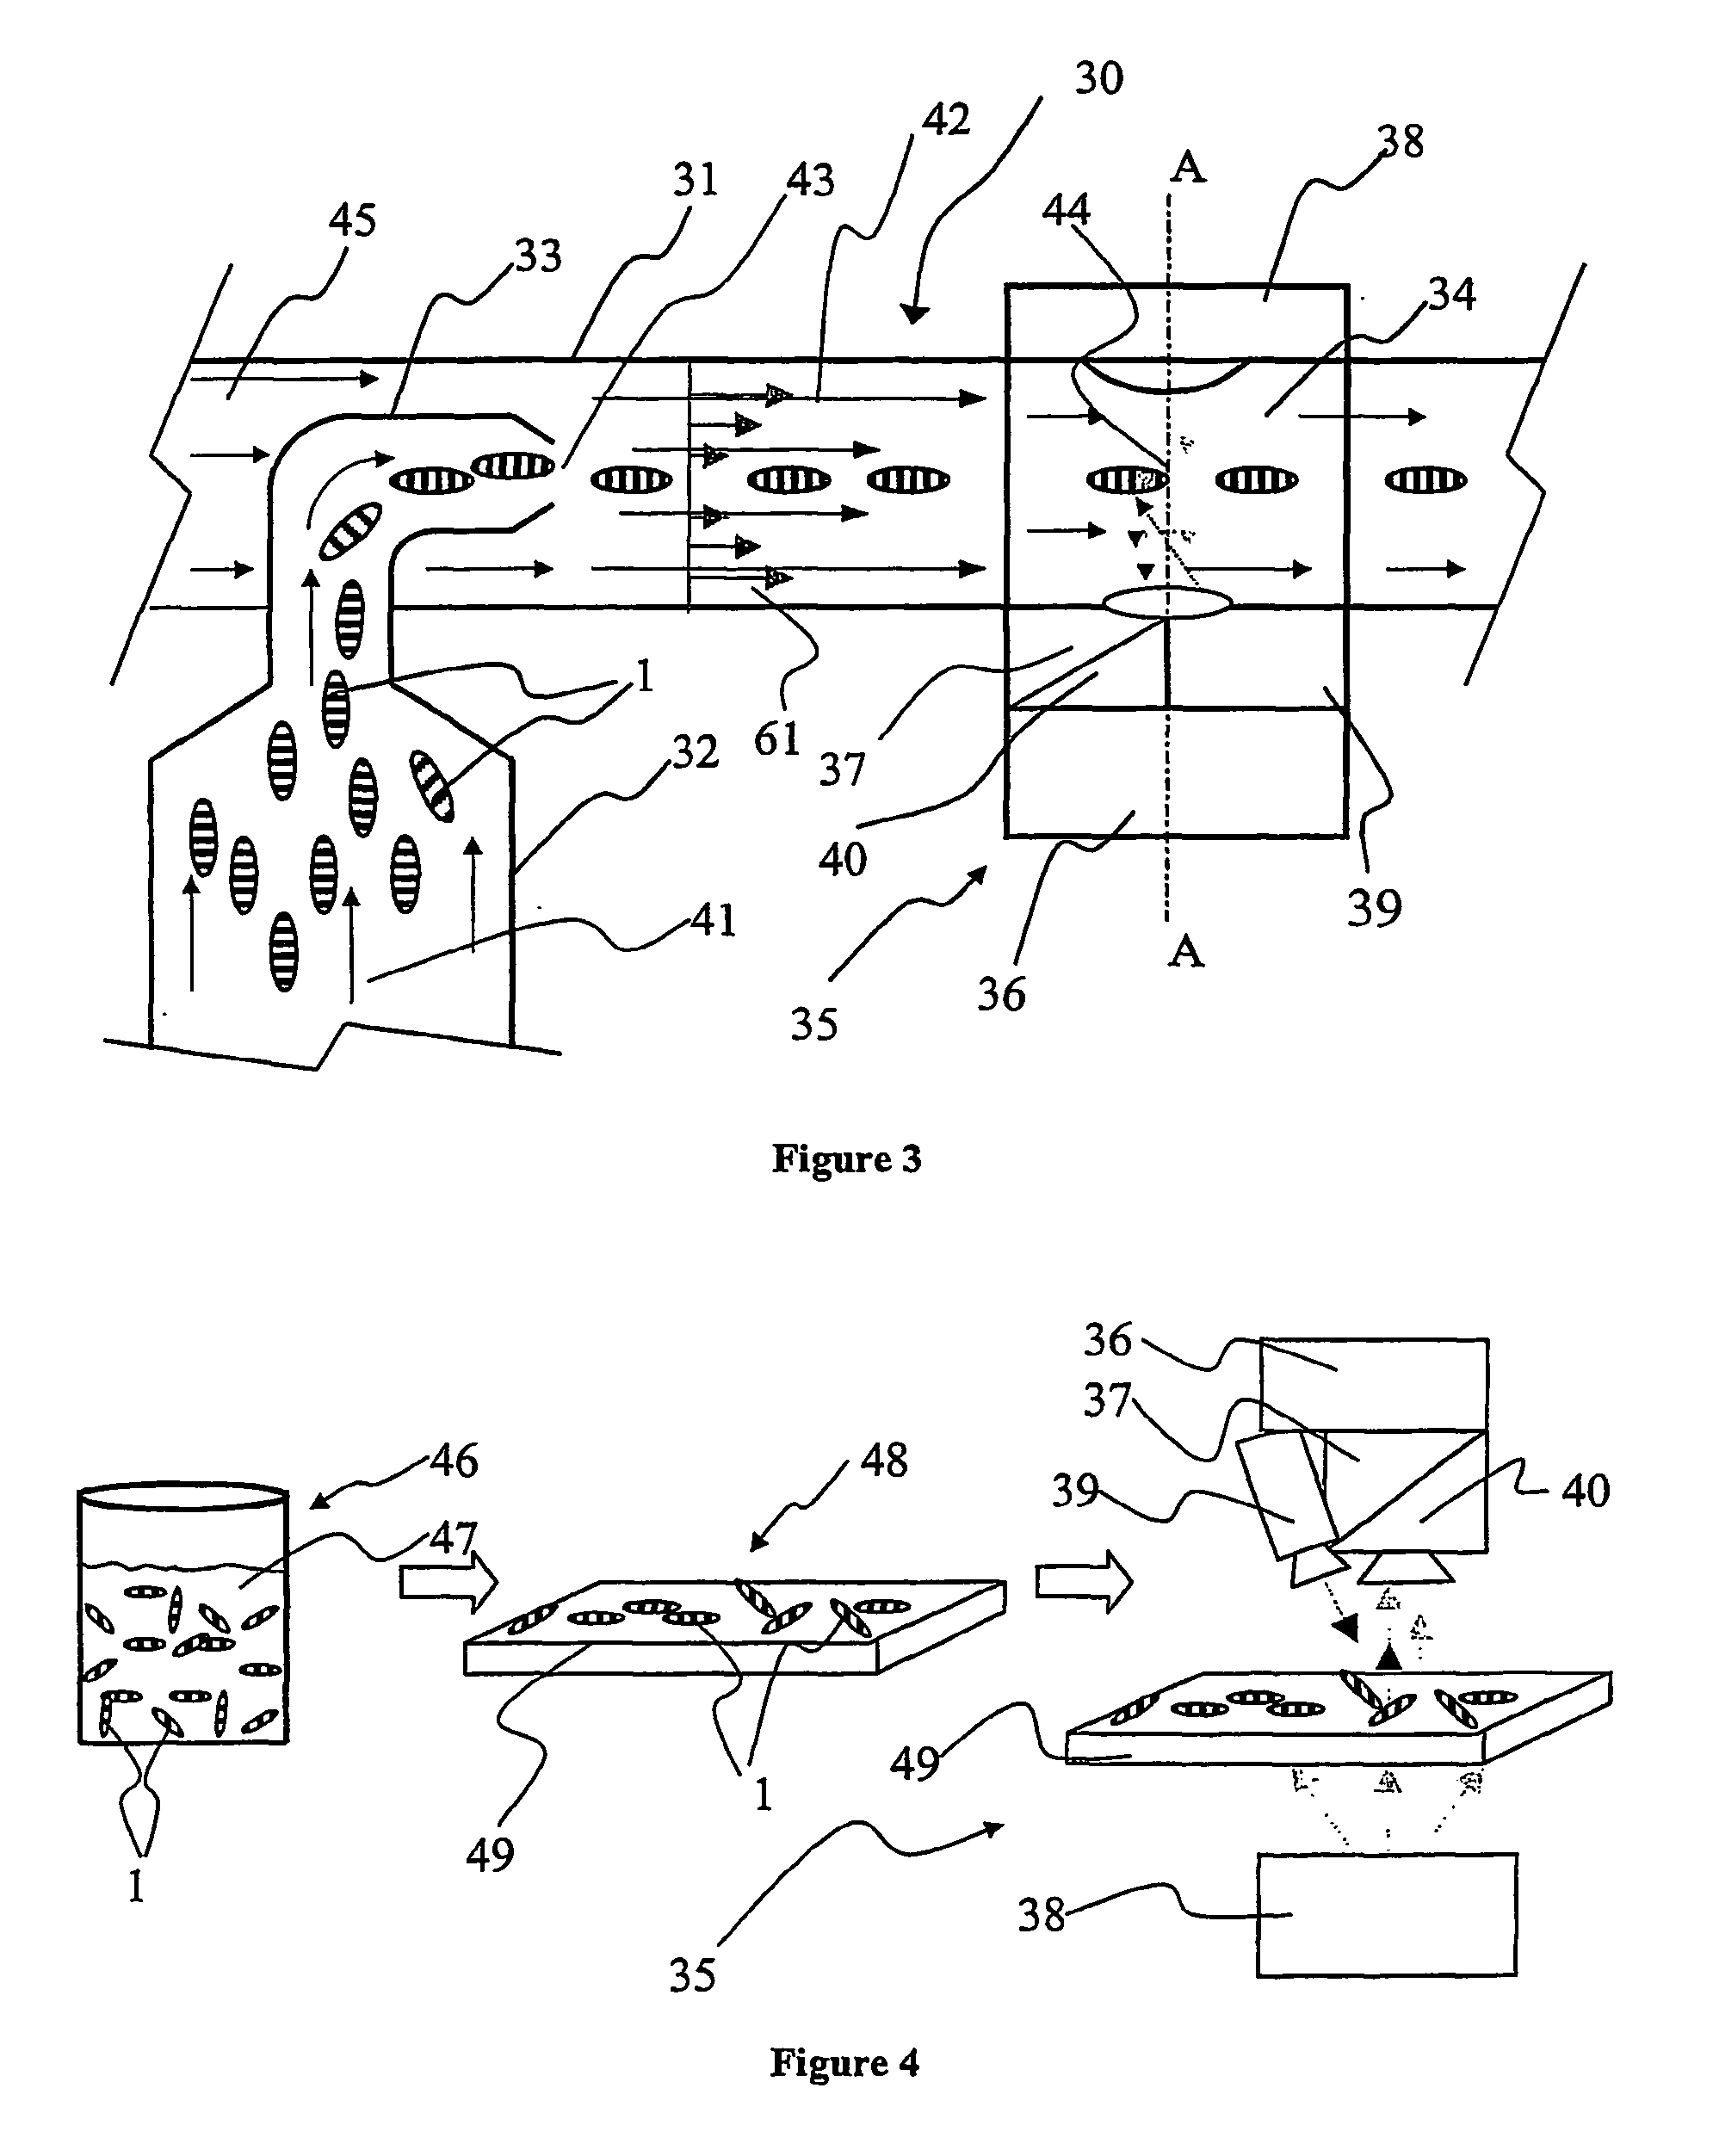 Biochemical method and apparatus for detecting genetic characteristic